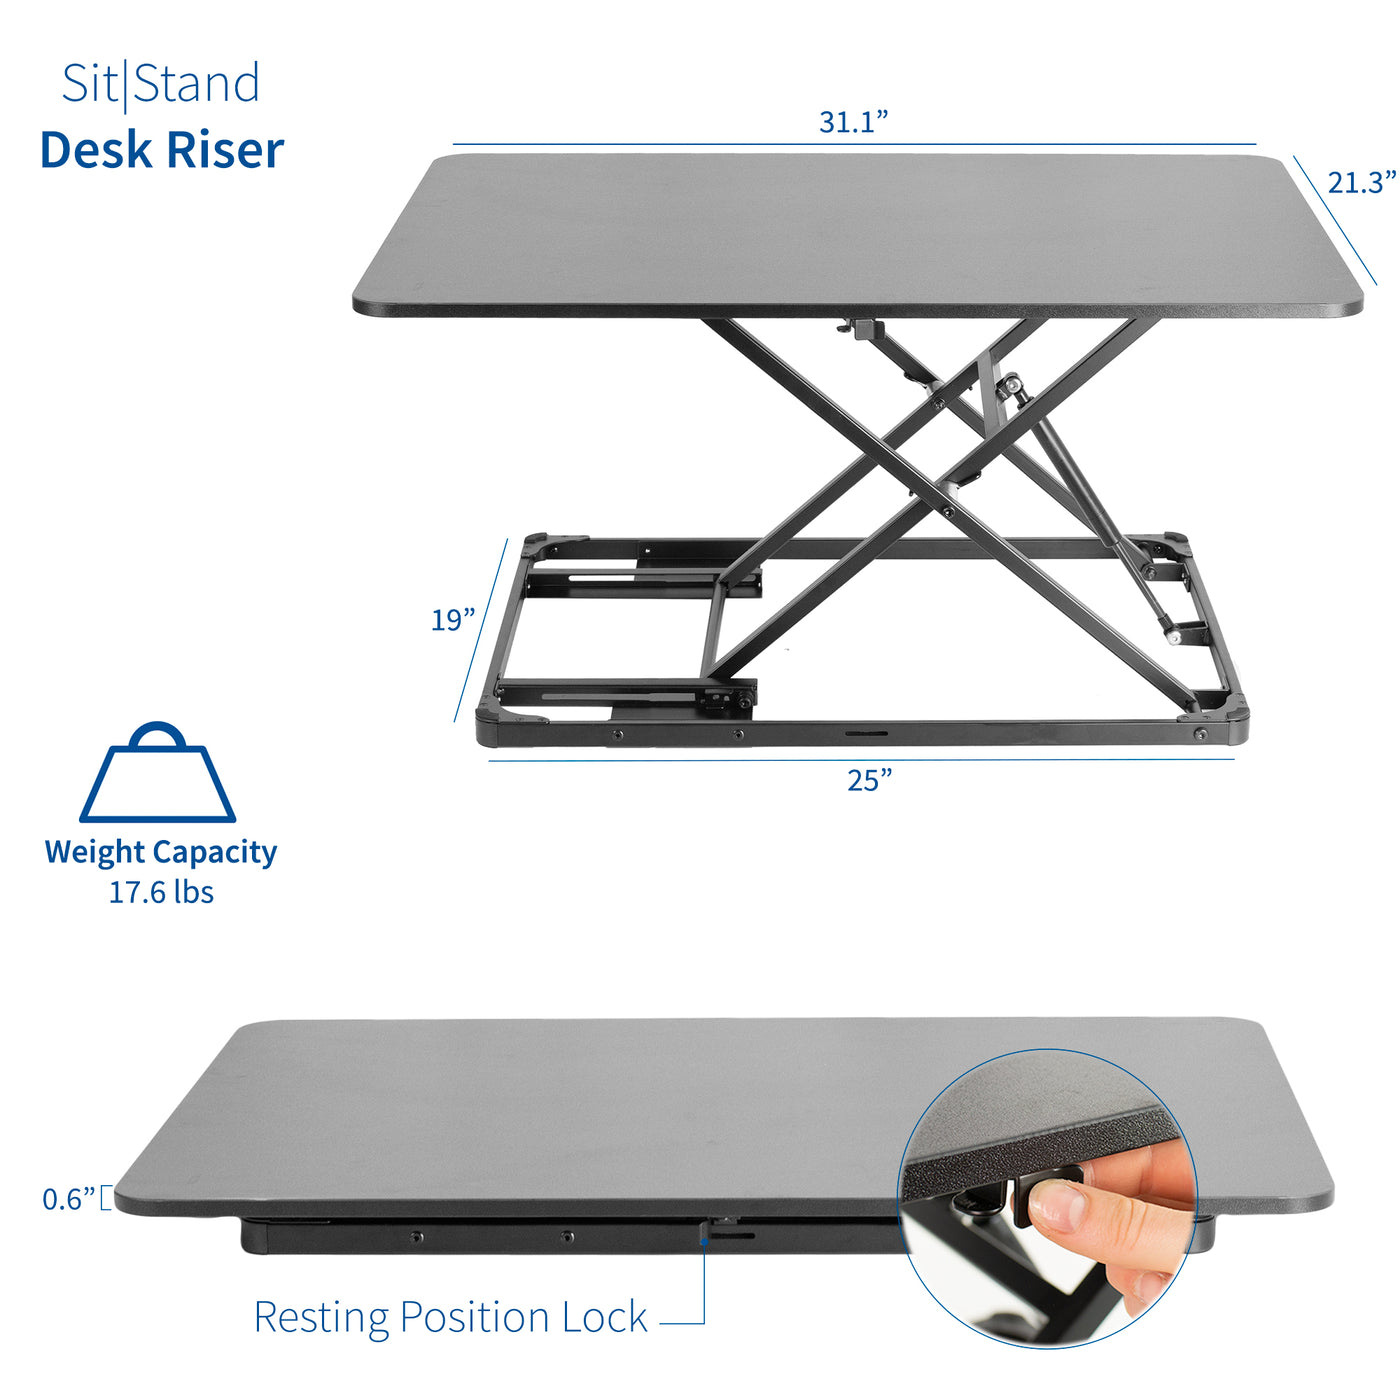 Heavy-duty height adjustable desk converter monitor riser for sit or stand efficient active workstation.